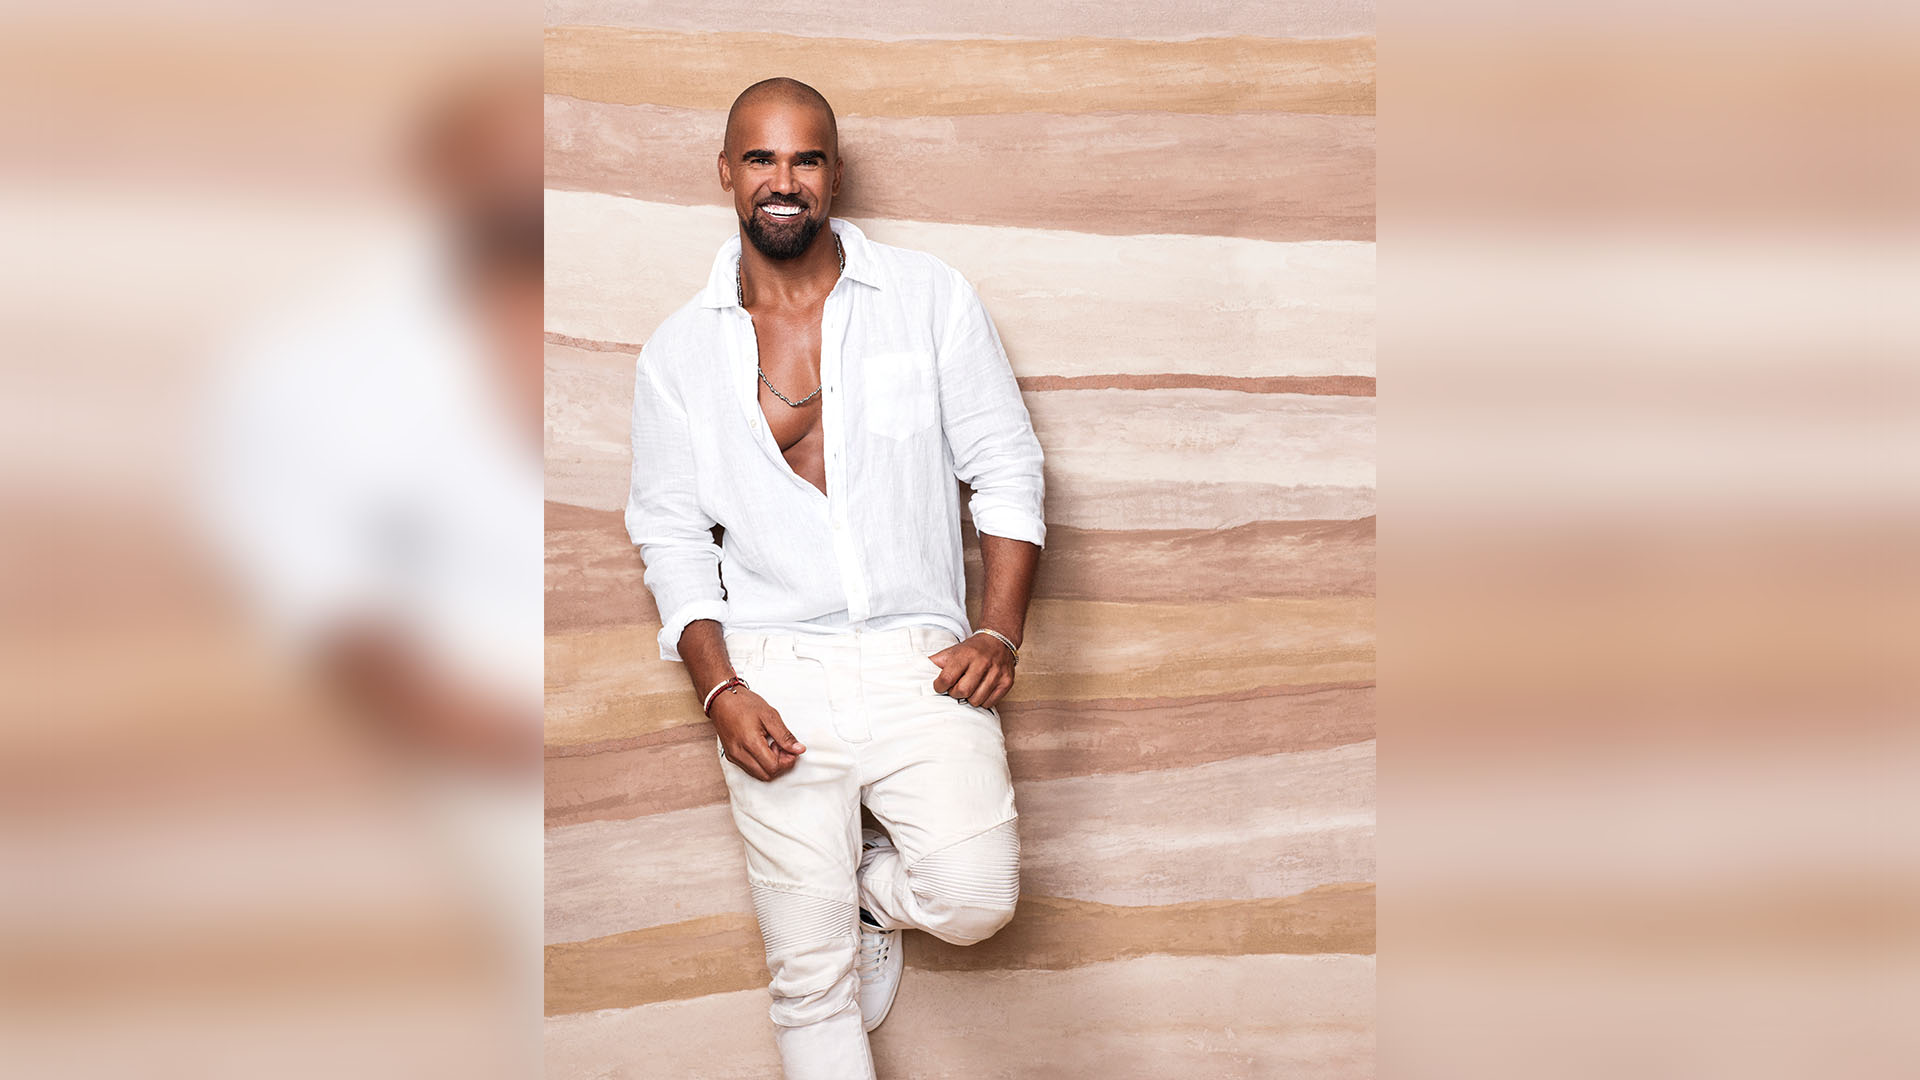 See these hot new Shemar Moore pics before anyone else